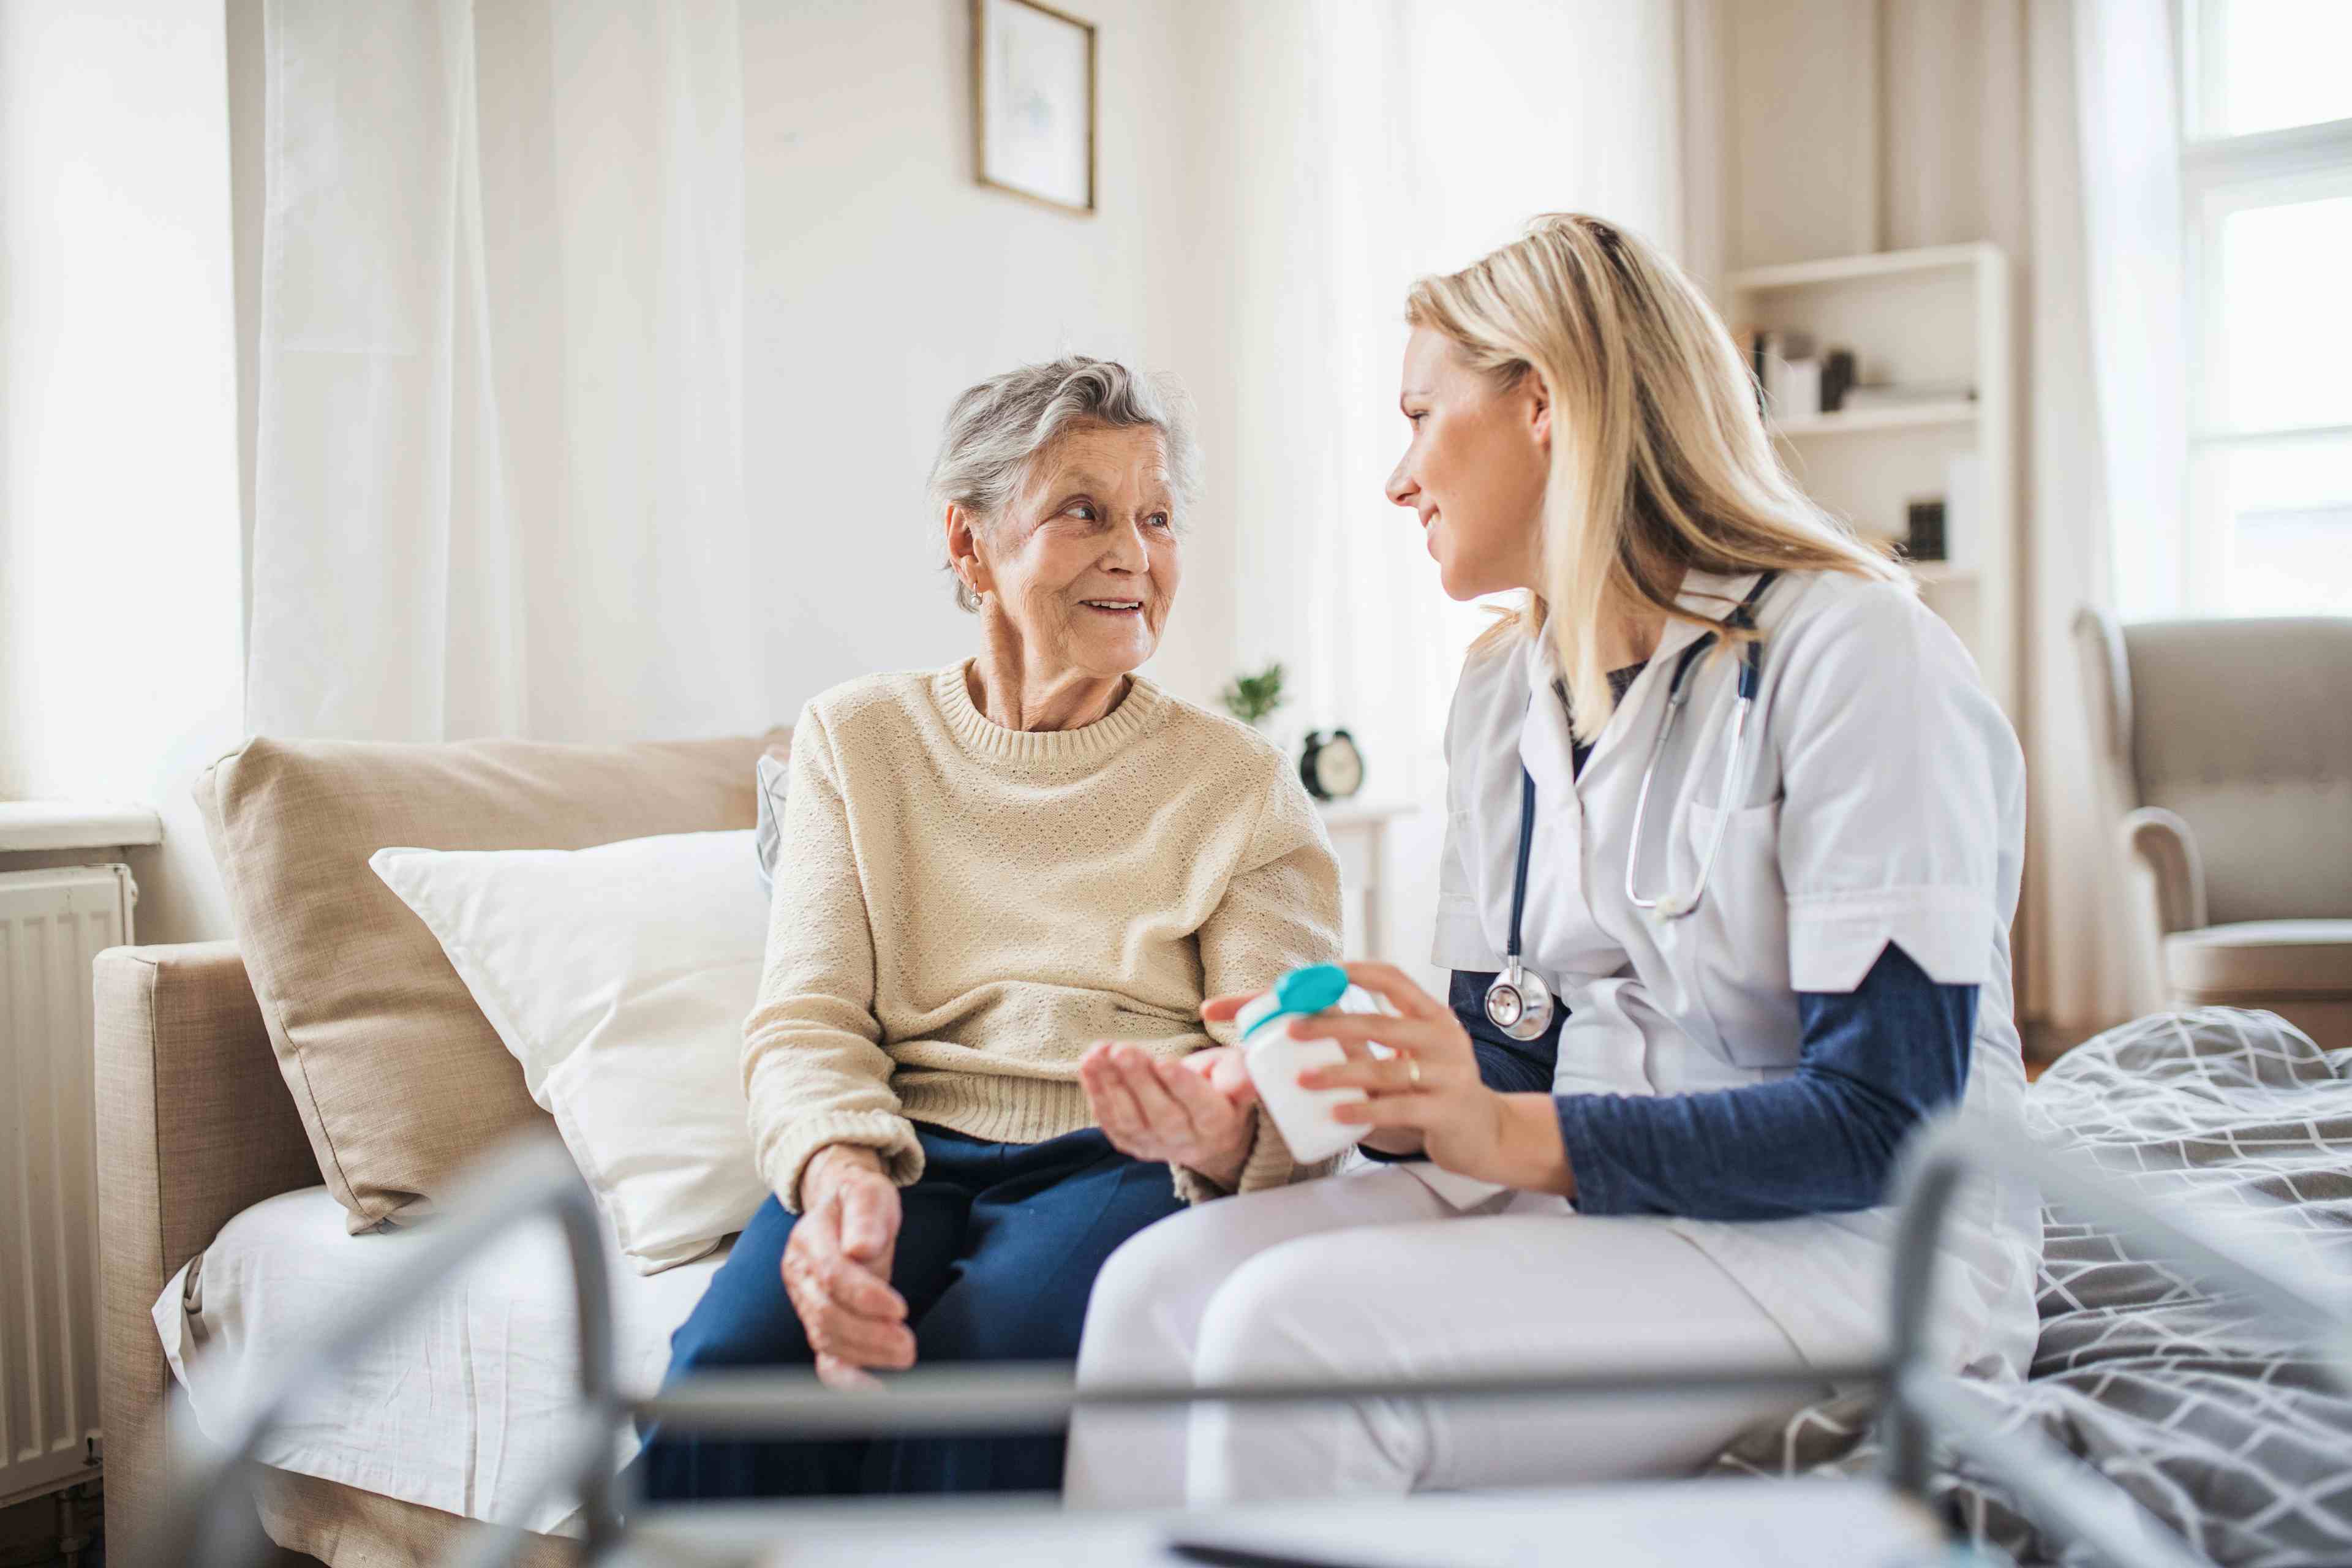 A health visitor explaining a senior woman how to take pills - Image credit: Halfpoint | stock.adobe.com 